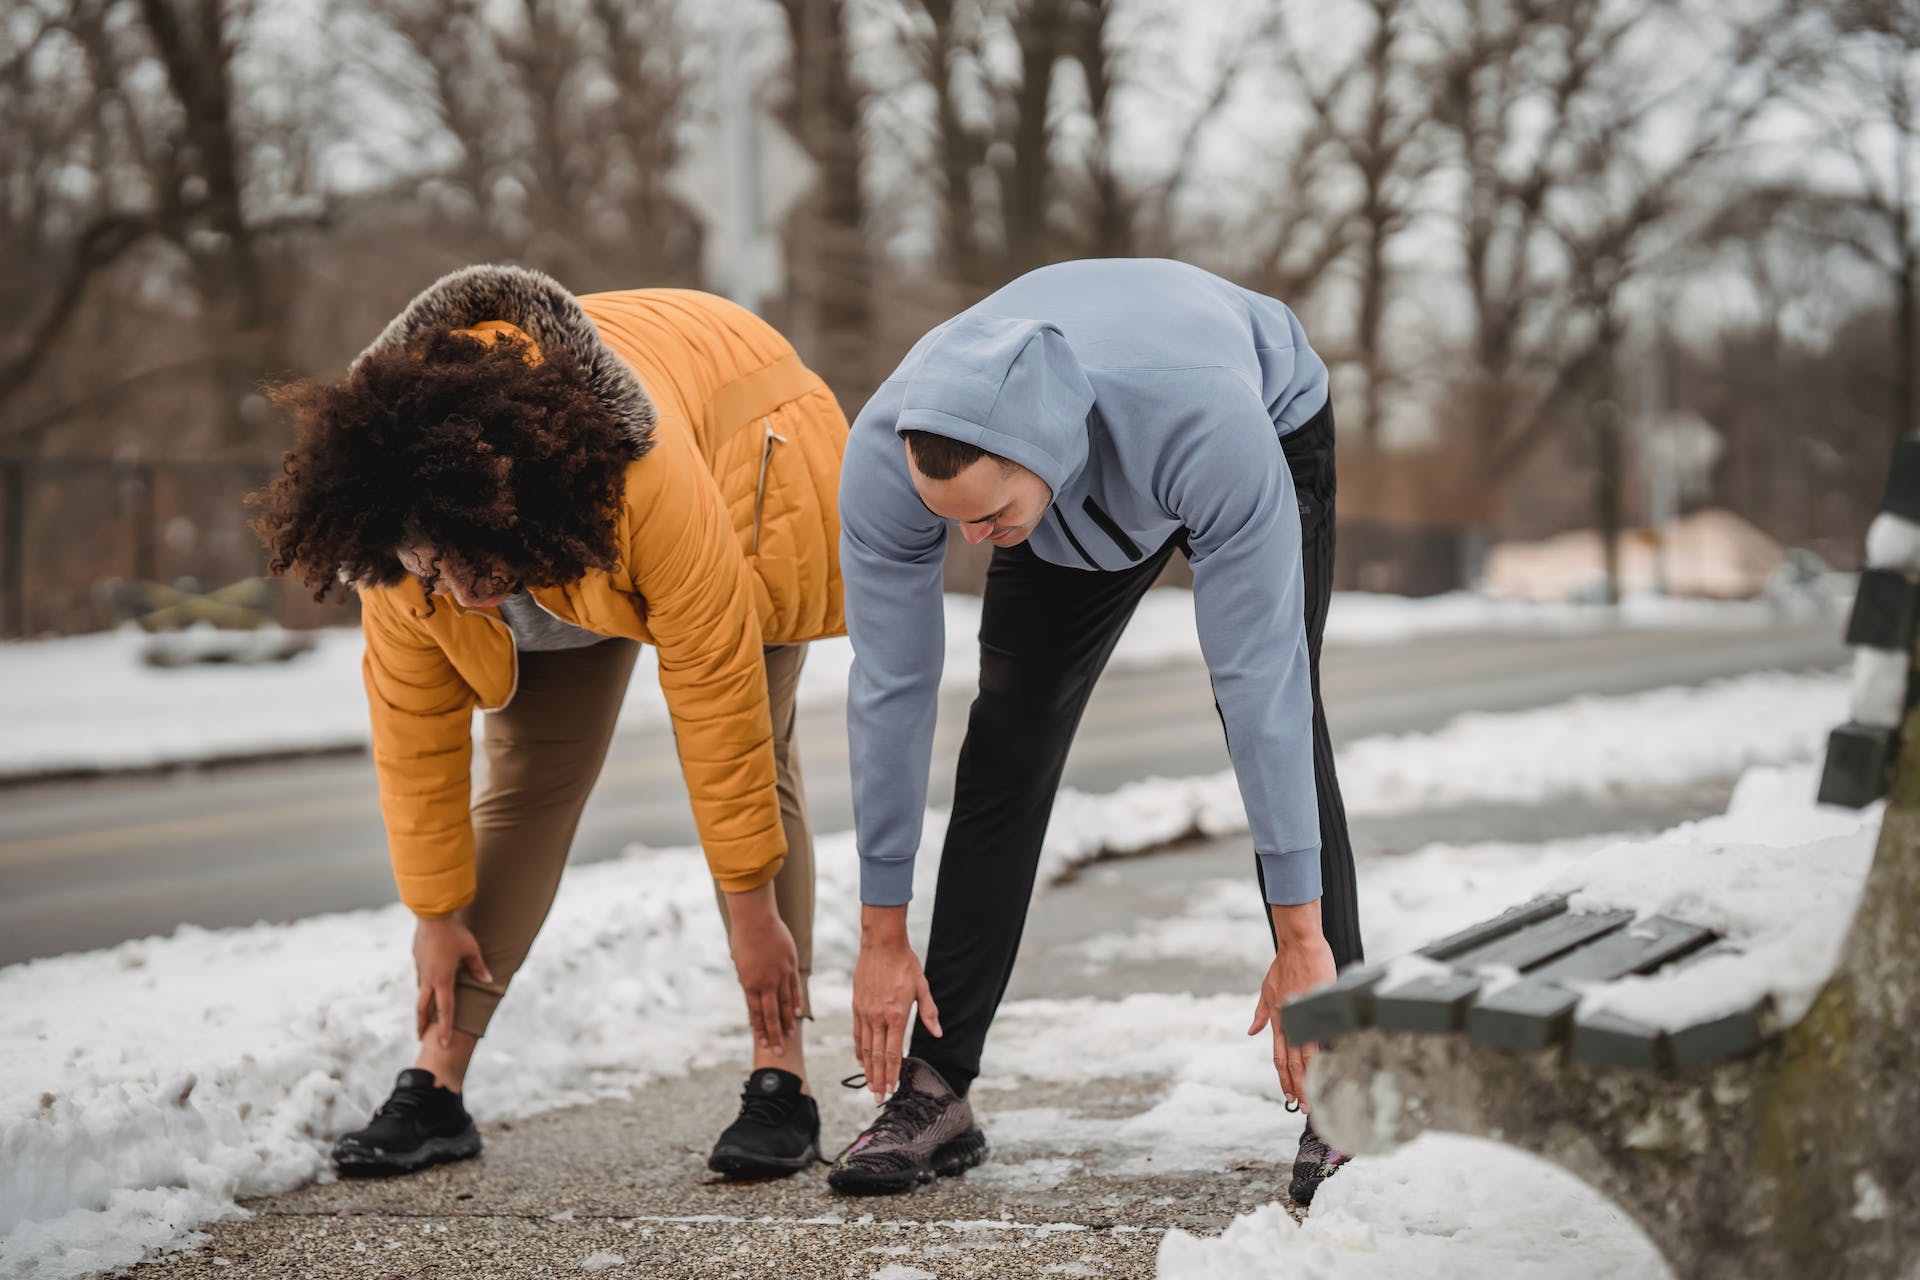 Winter Workout Tips to Keep Active